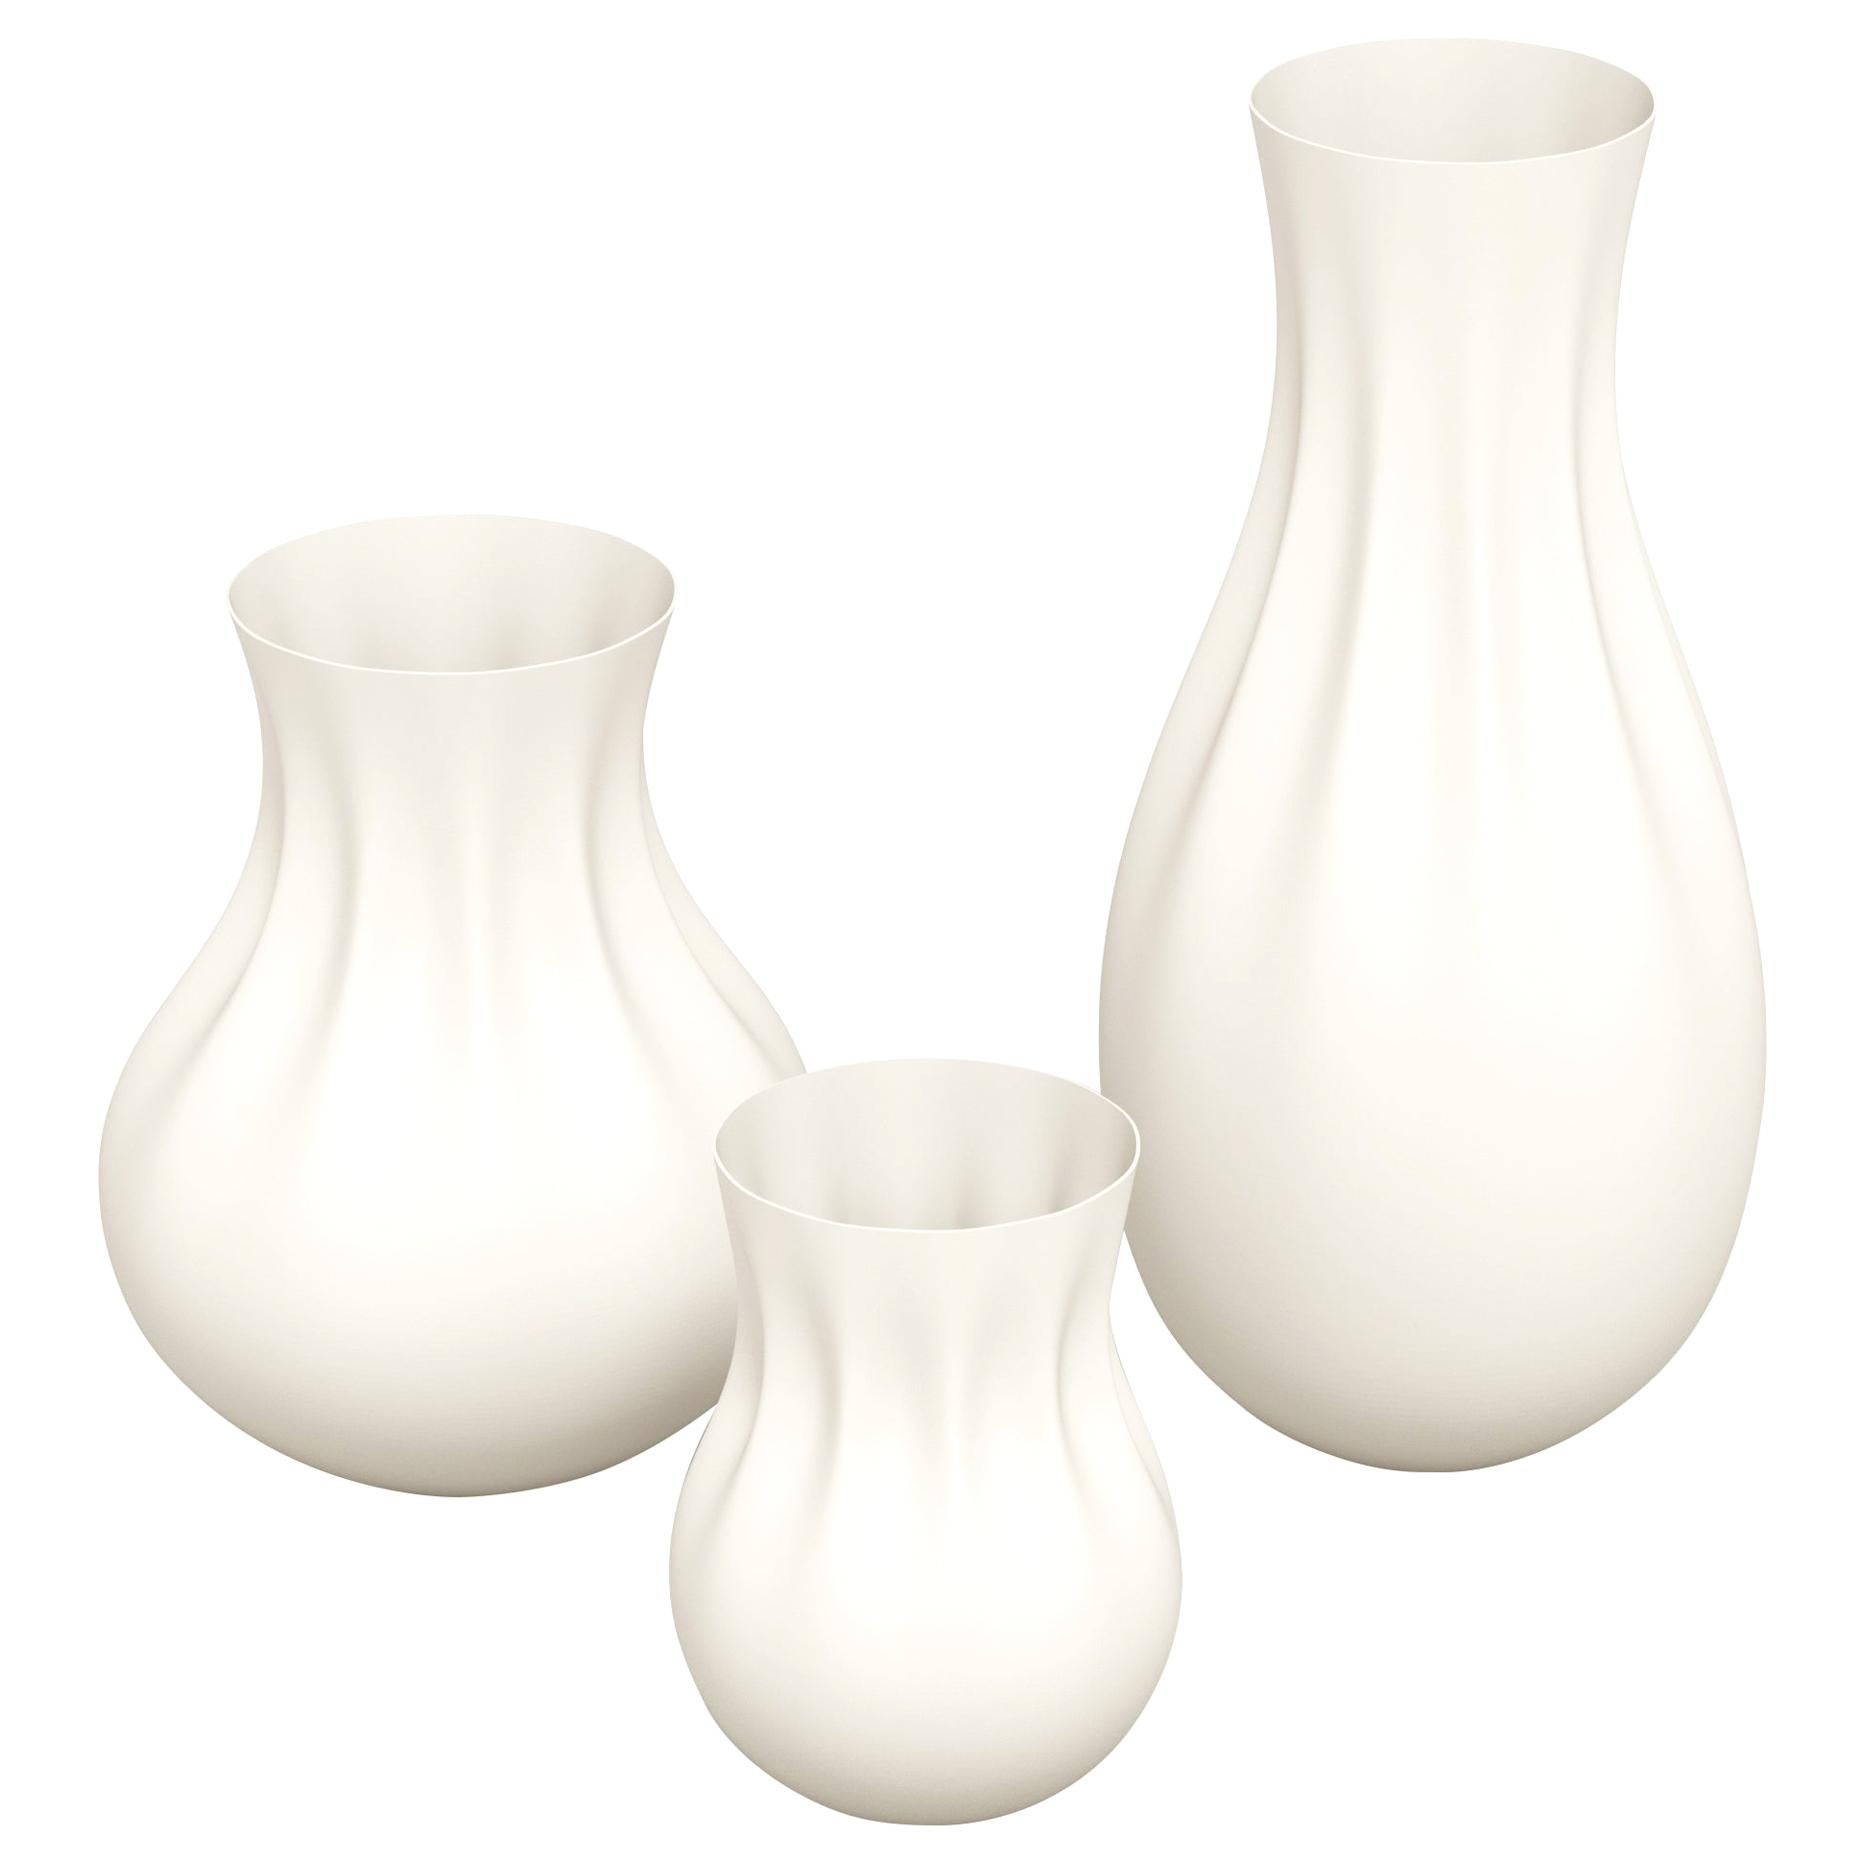 Great things to People Tarrugao Vase in Cream White Porcelain for Cappellini